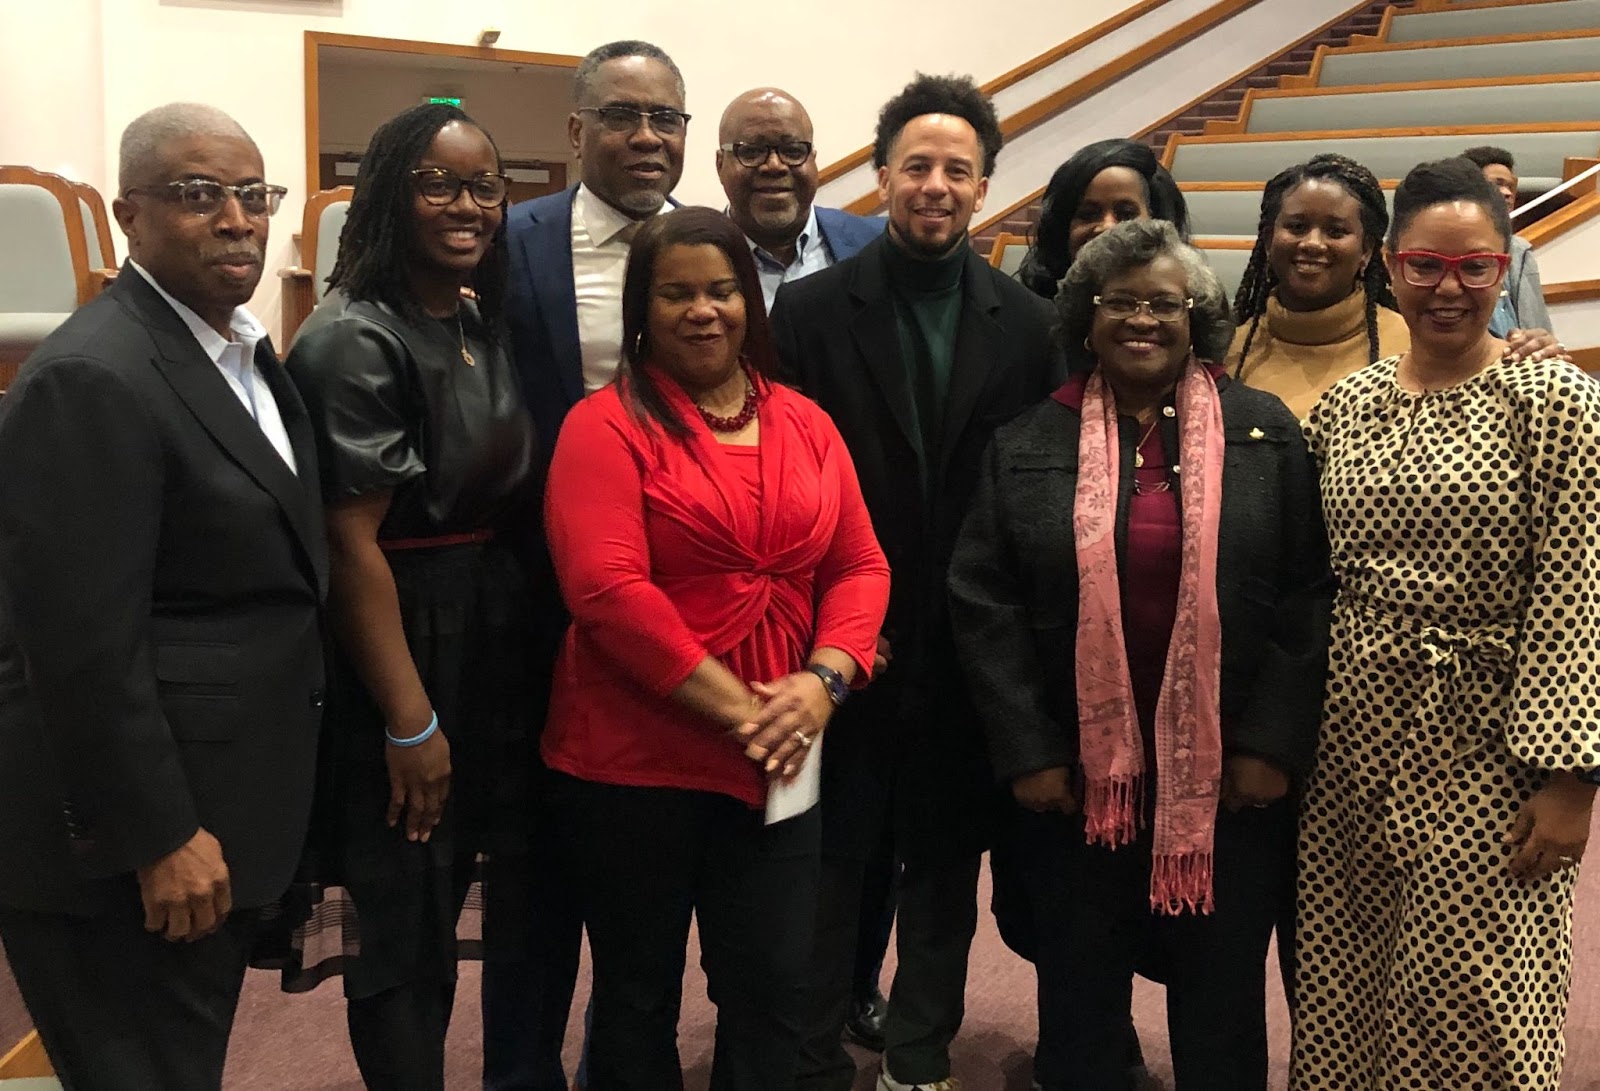 From left: Saint Paul Executive Pastor Lamont Harris; Dr. Tatiana Grant, who graduated from Sacramento State; Saint Paul Pastor Kenneth R. Reece; first lady Lisa Reece; Roy Mathews, a Sac State graduate; Sac State President Dr. Luke Wood; Dr. Marcellene Watson-Derbigny, Sac State associate vice president for student retention and academic success (partially obscured); Sac State graduate Felicia Bessent; 2023 Sac State graduate Carmesha Grayson; and Dr. Colette Harris-Mathews.